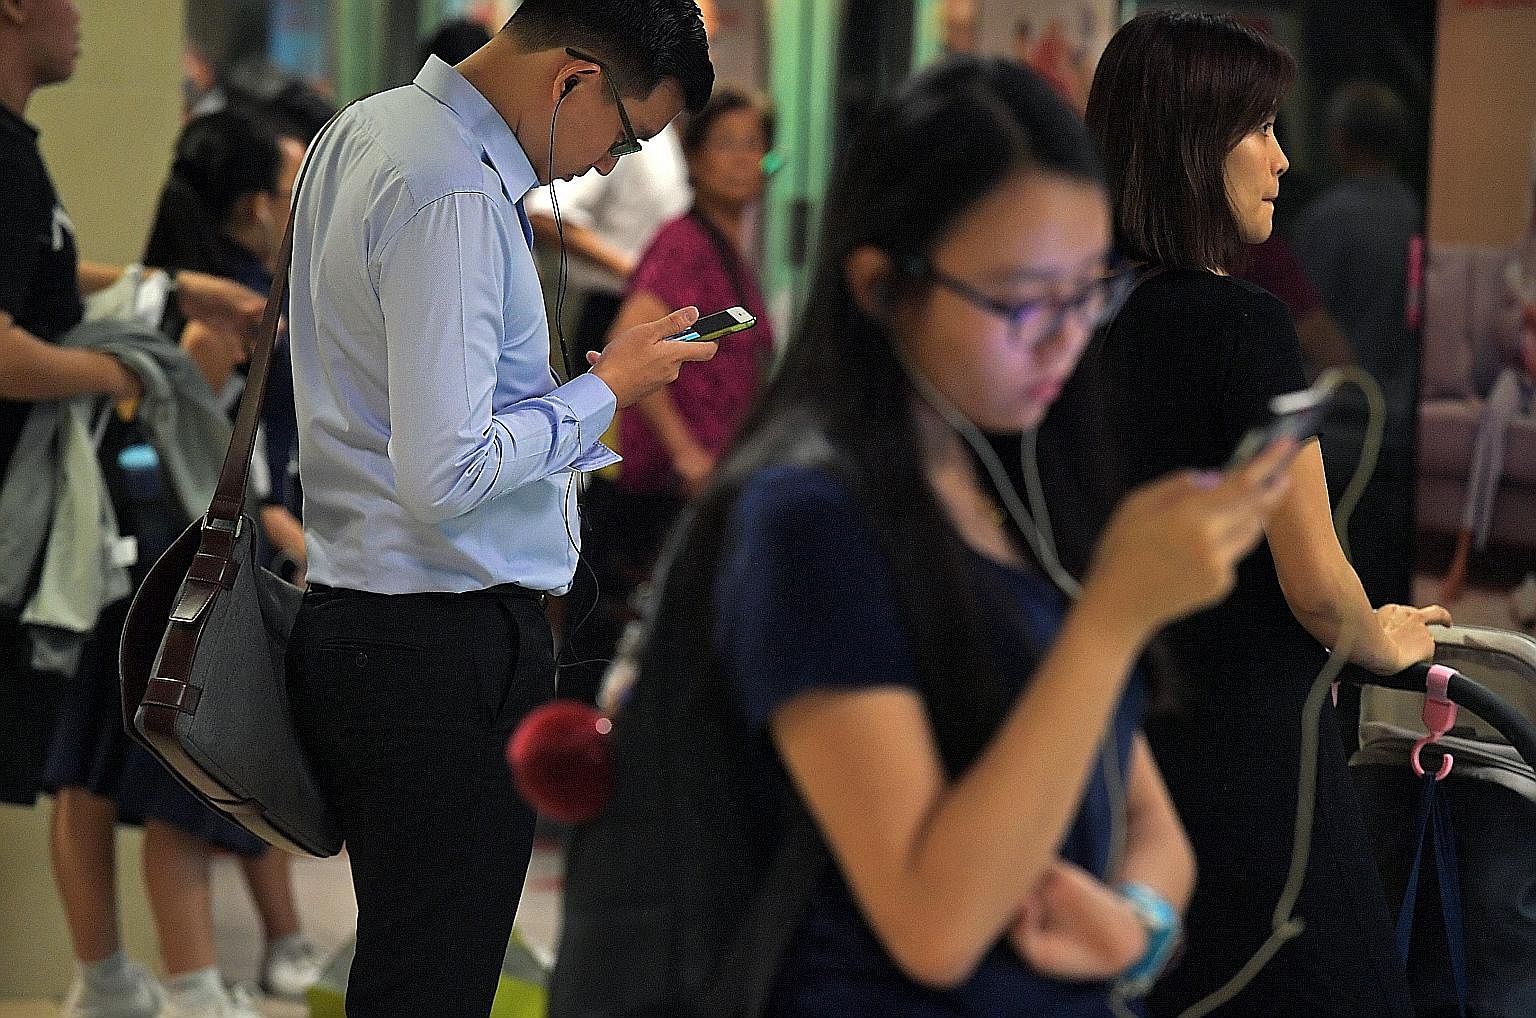 Circles.Life may be the cheapest option for heavy users of mobile data, with its plan costing $48 a month for a whopping 26GB of mobile data, However, customers who travel often and prefer not to make WhatsApp calls may find Singtel, StarHub and M1's